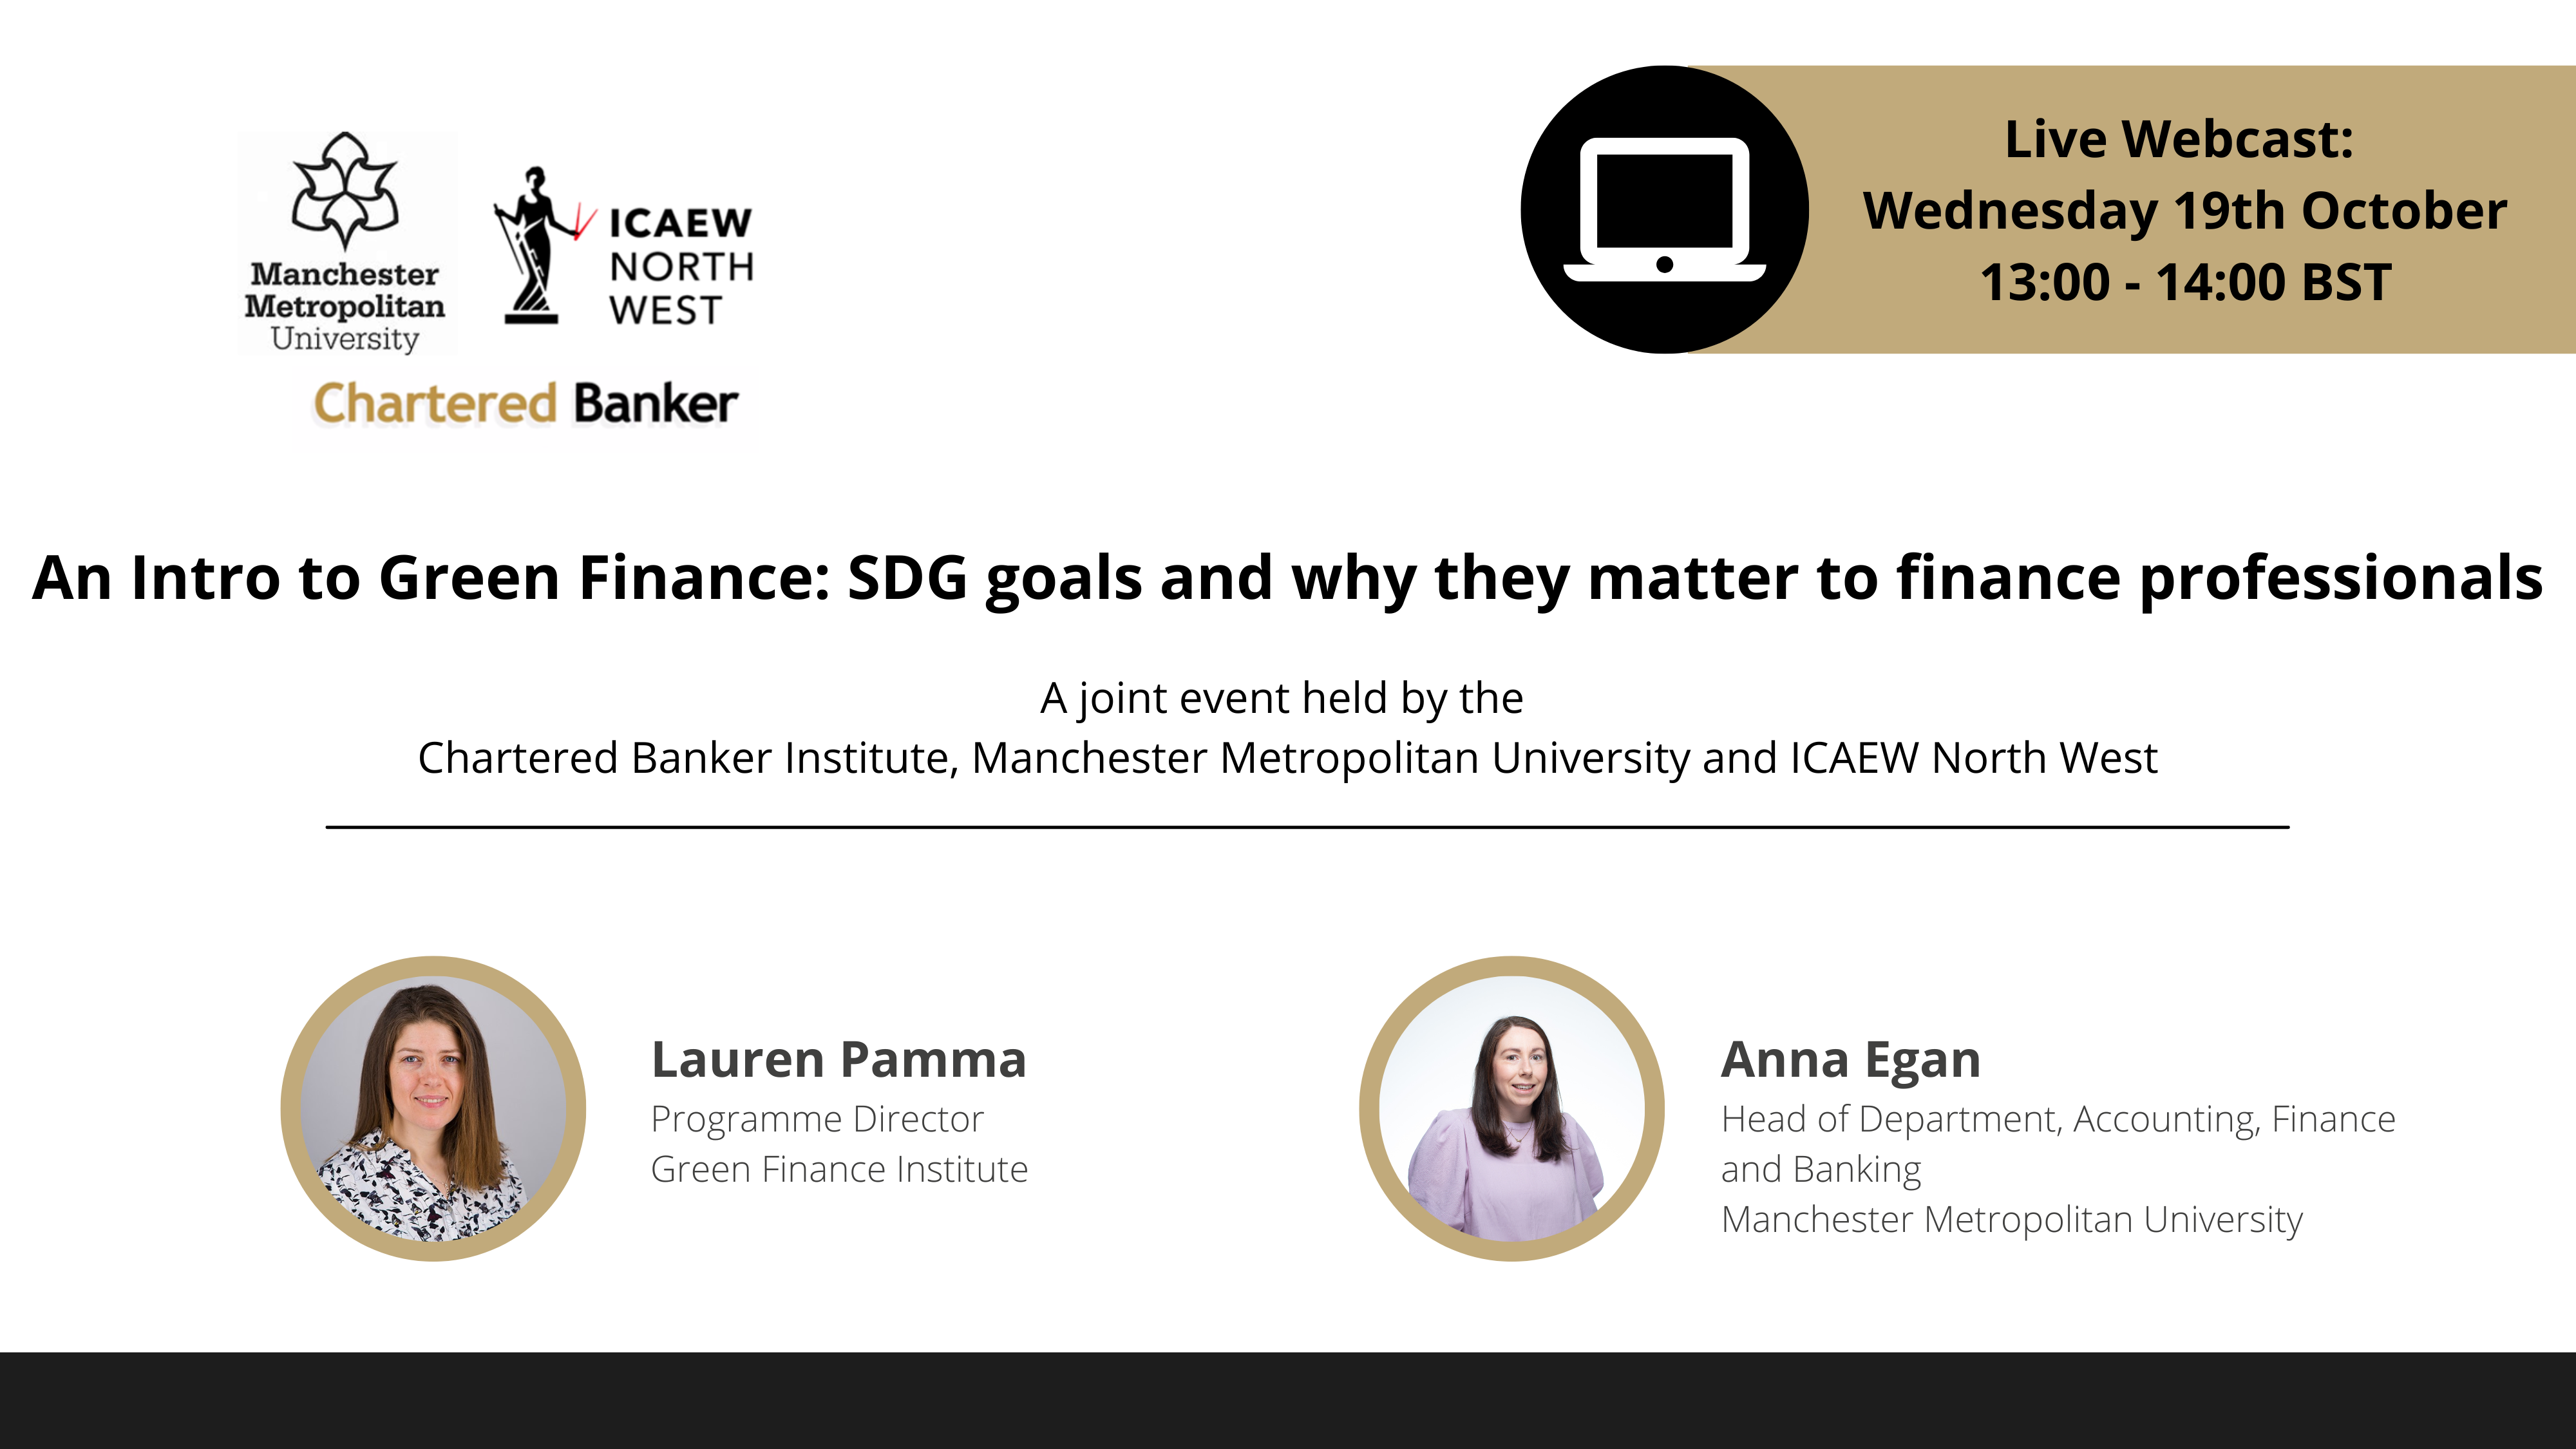 An Intro to Green Finance: SDG goals and why they matter to finance professionals